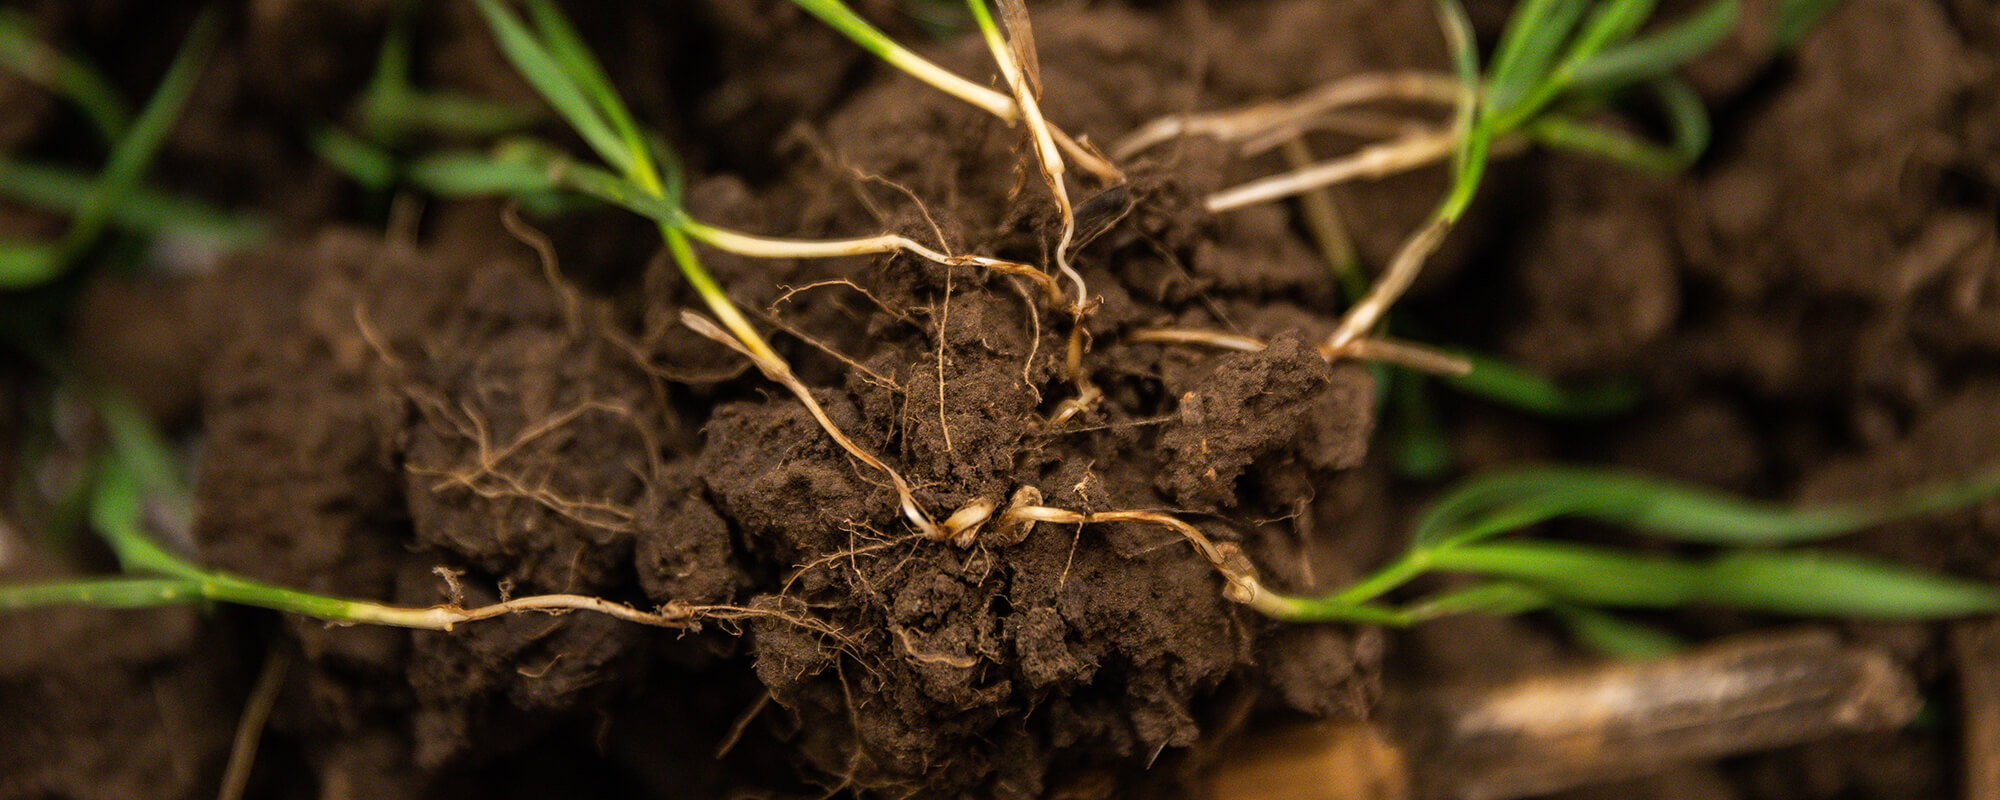 Tools to Start Your Soil Health Journey